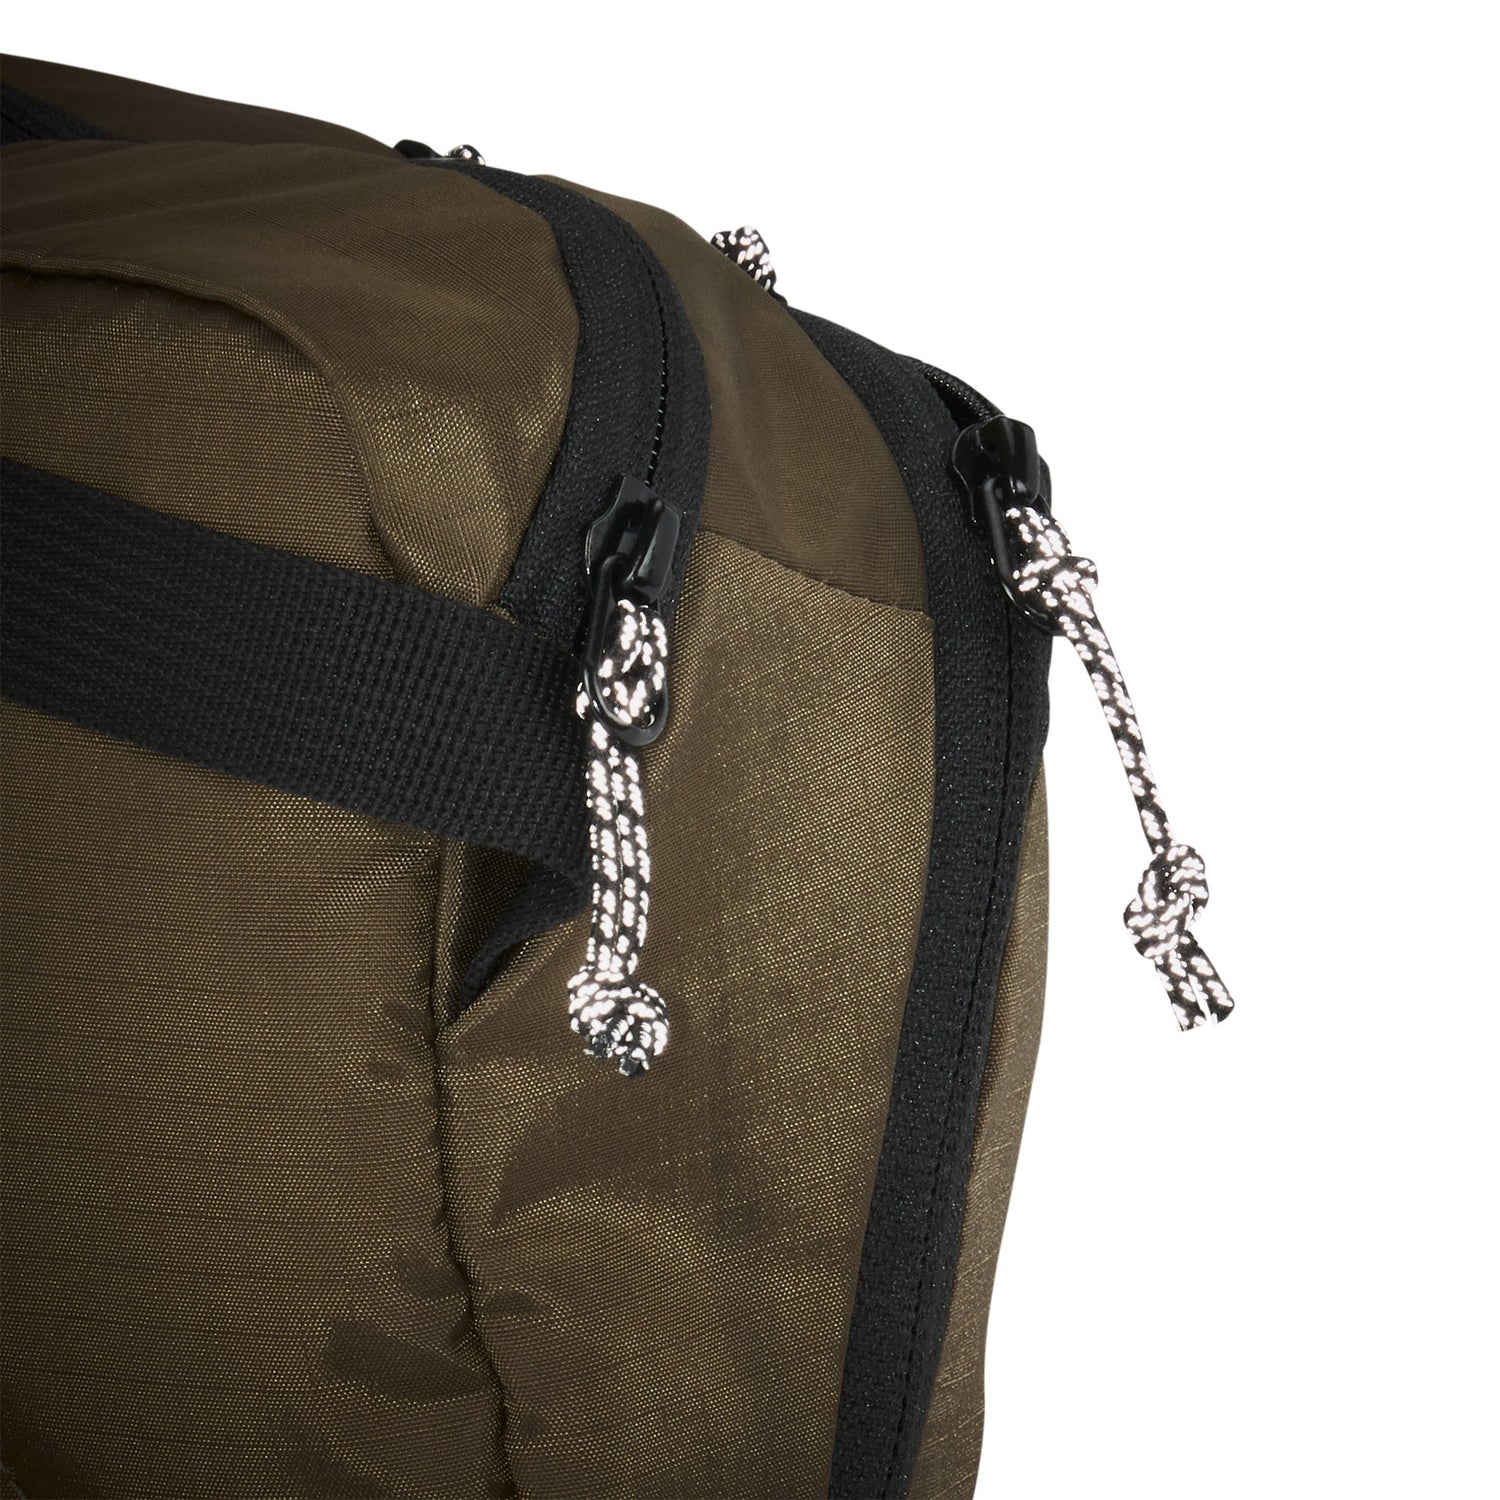 Aevor Sacoche Bag - Made from Recycled PET-bottles Ripstop Olive Gold Bags